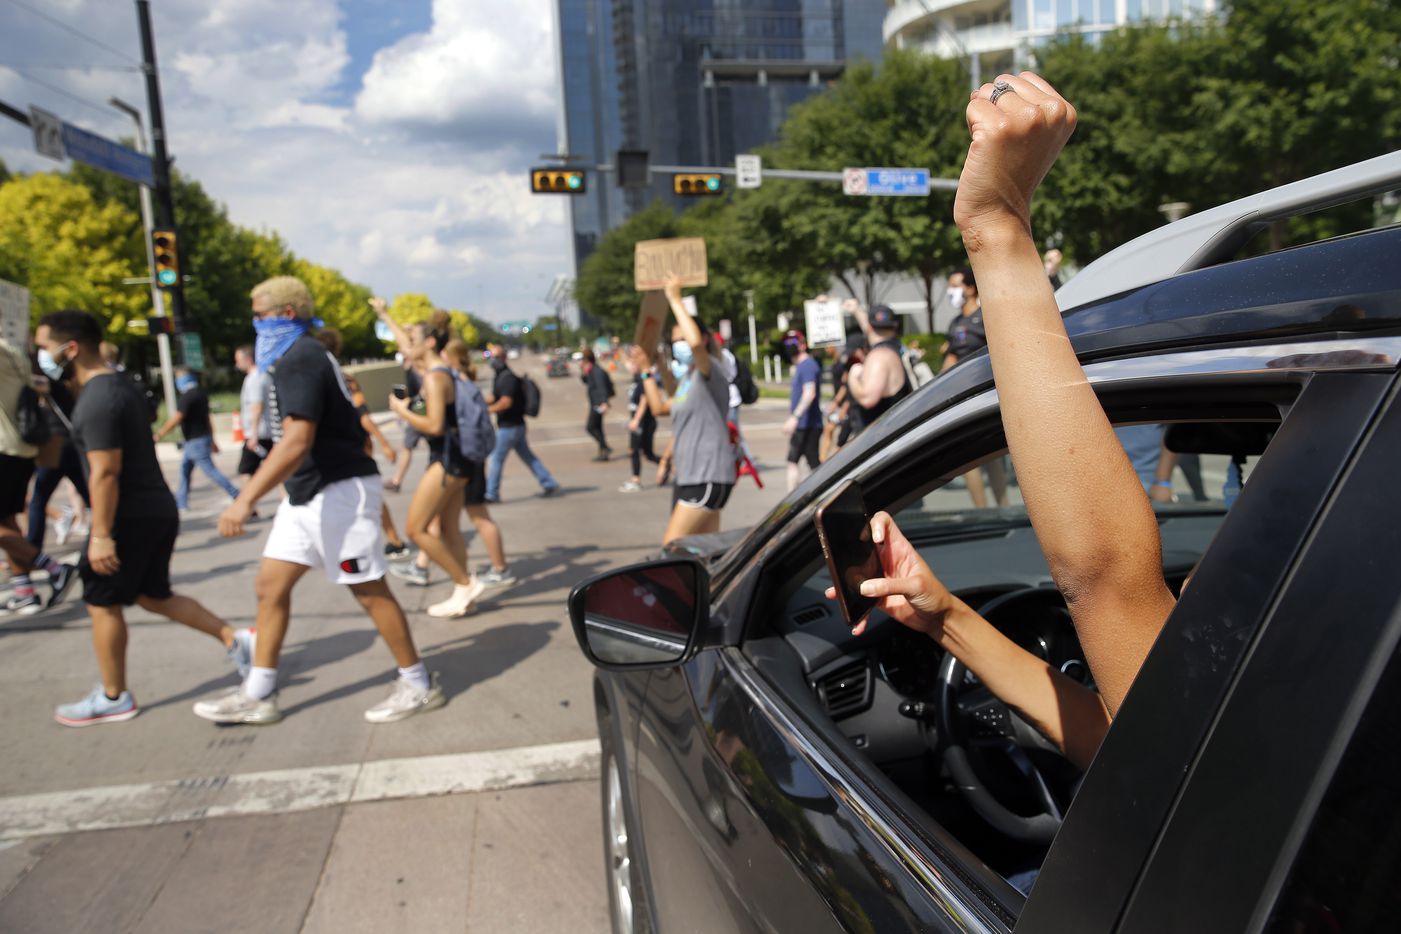 A supporter raises her first as protestors supporting Black Lives Matters march through...